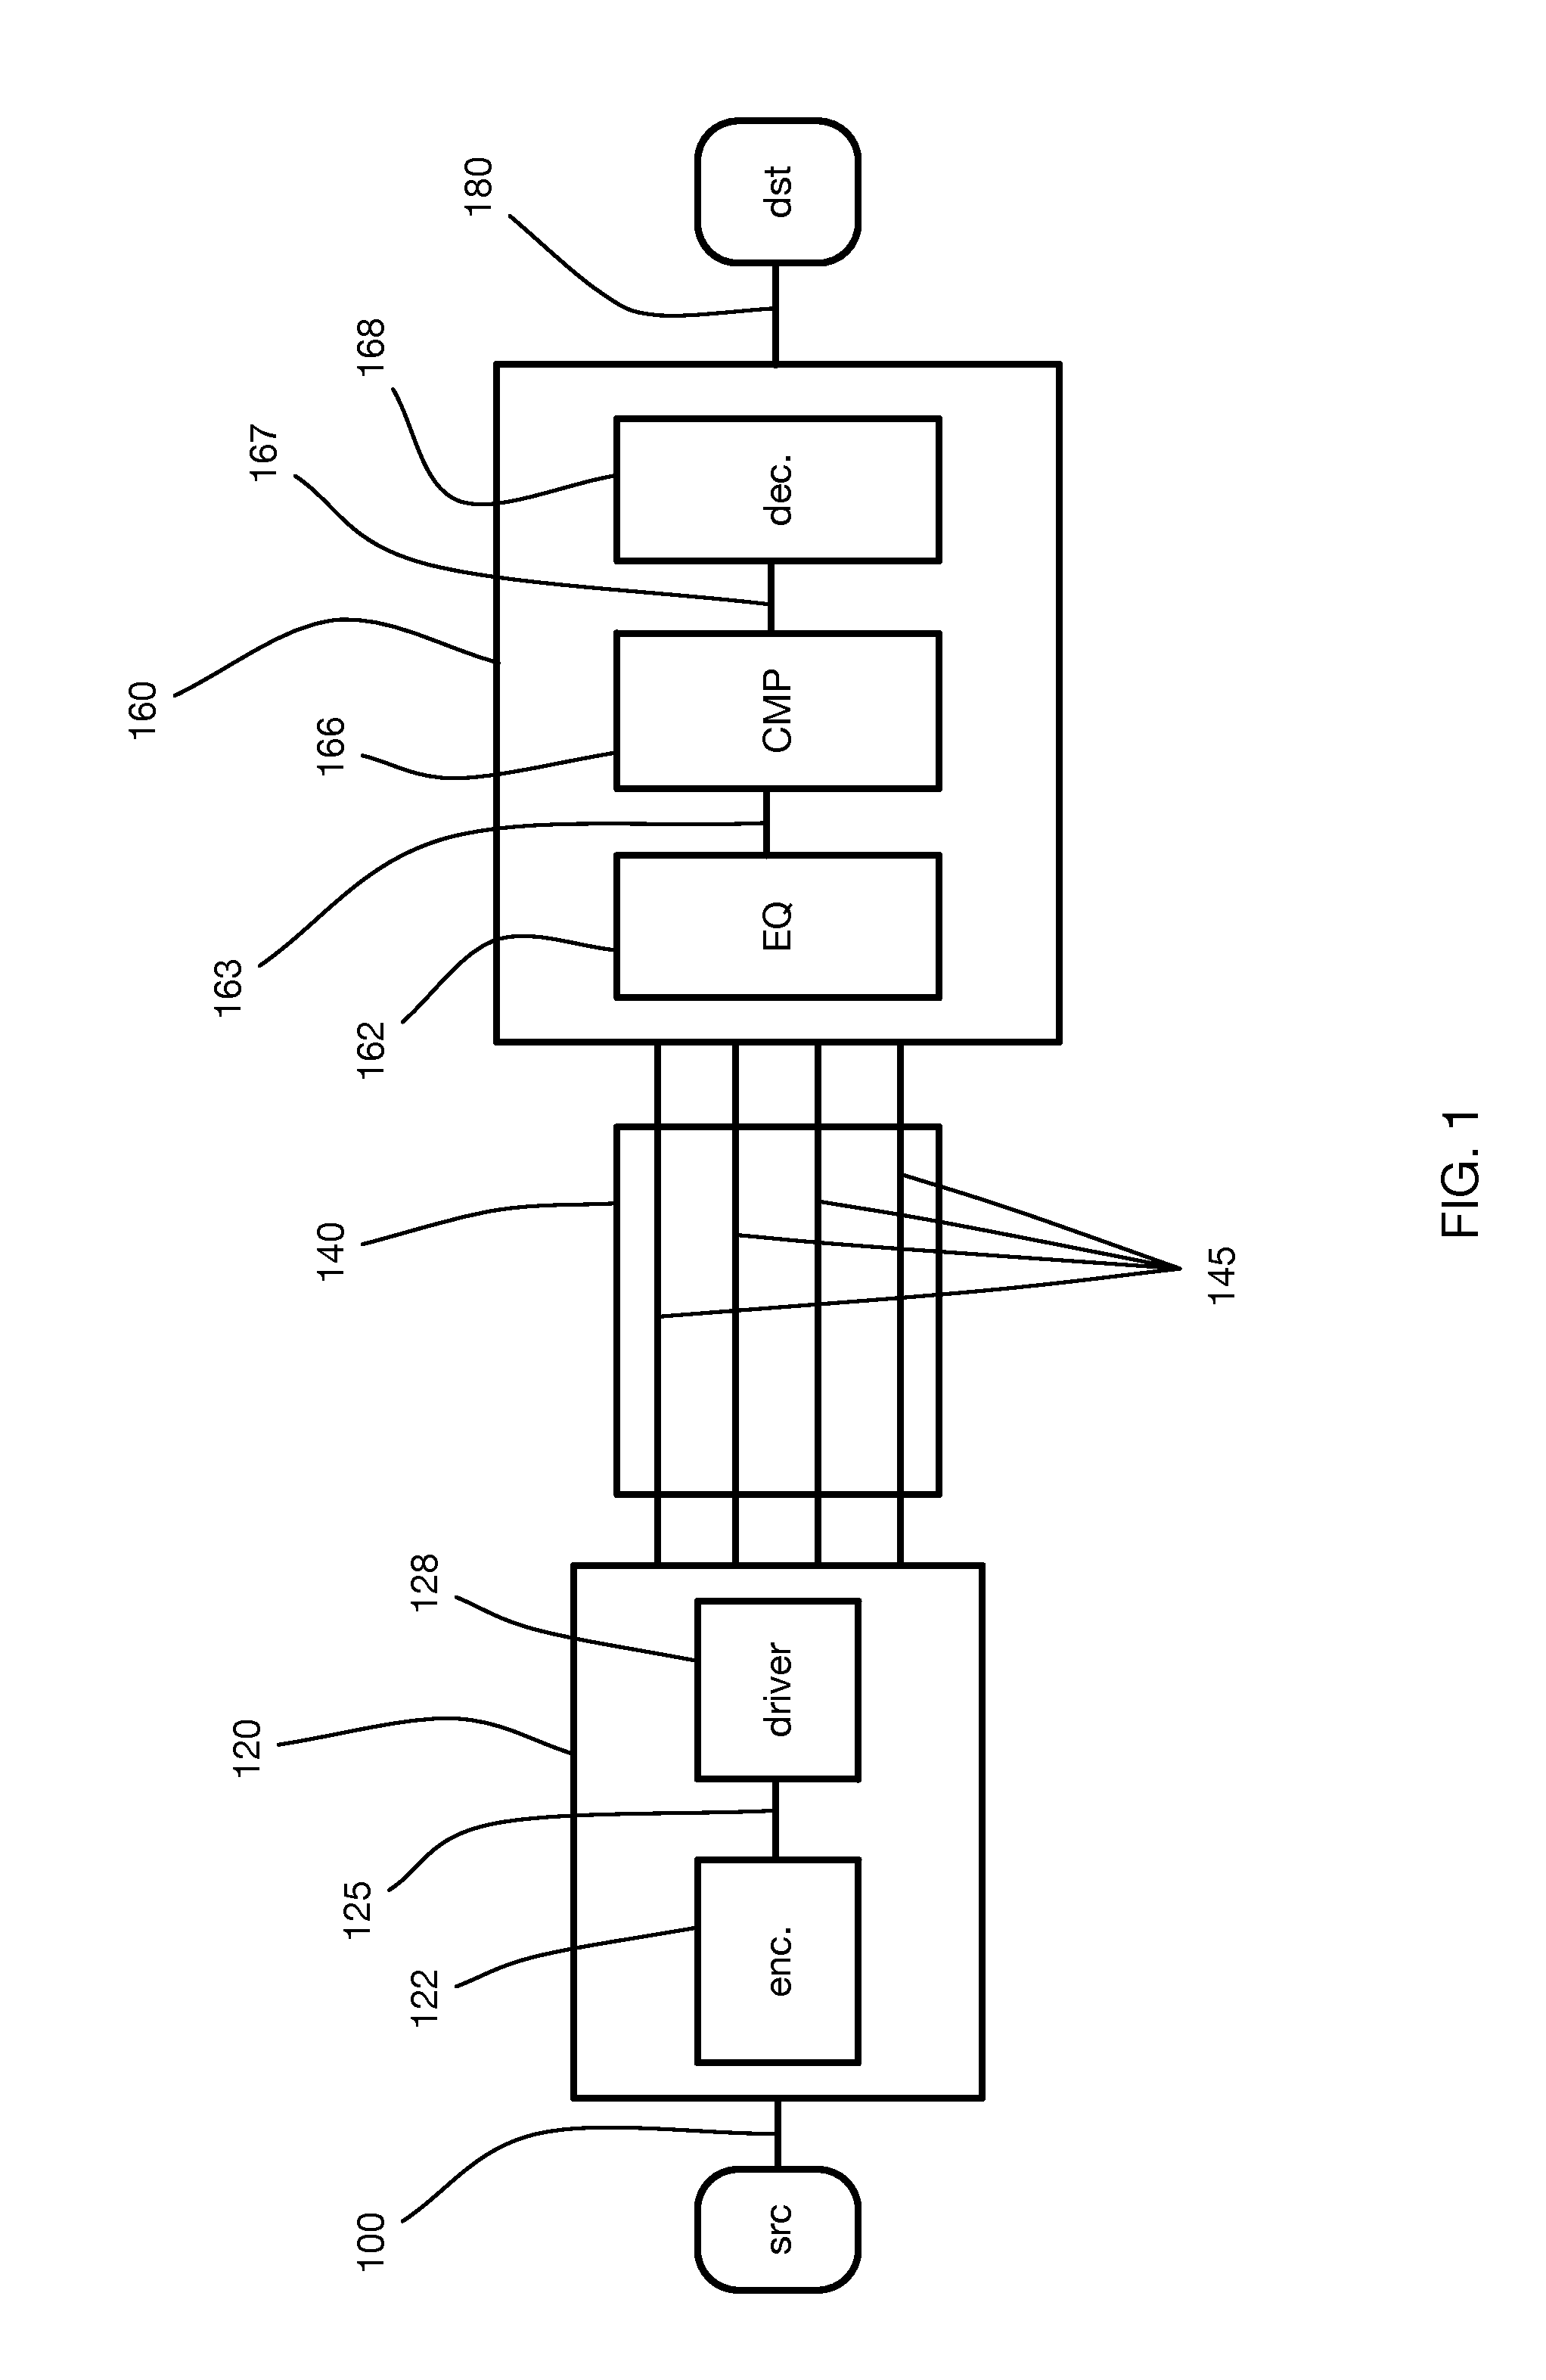 Multiwire Linear Equalizer for Vector Signaling Code Receiver